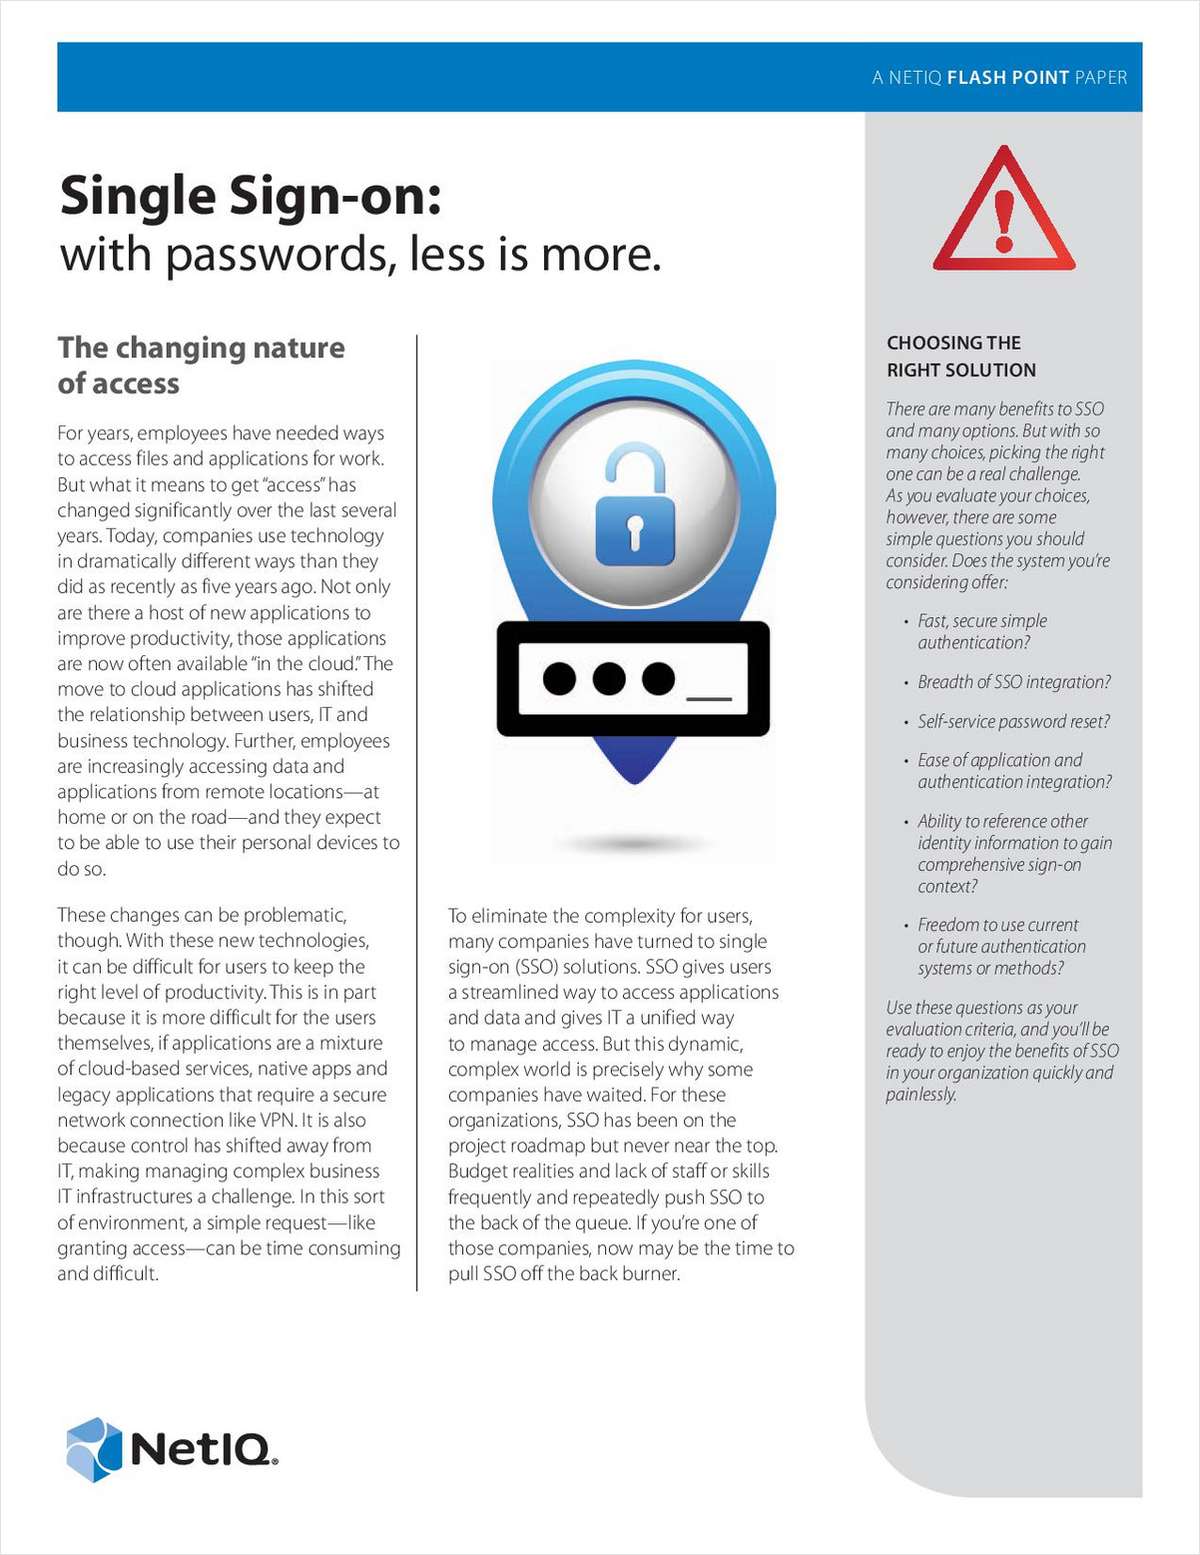 Single Sign-On: with Passwords, Less is More